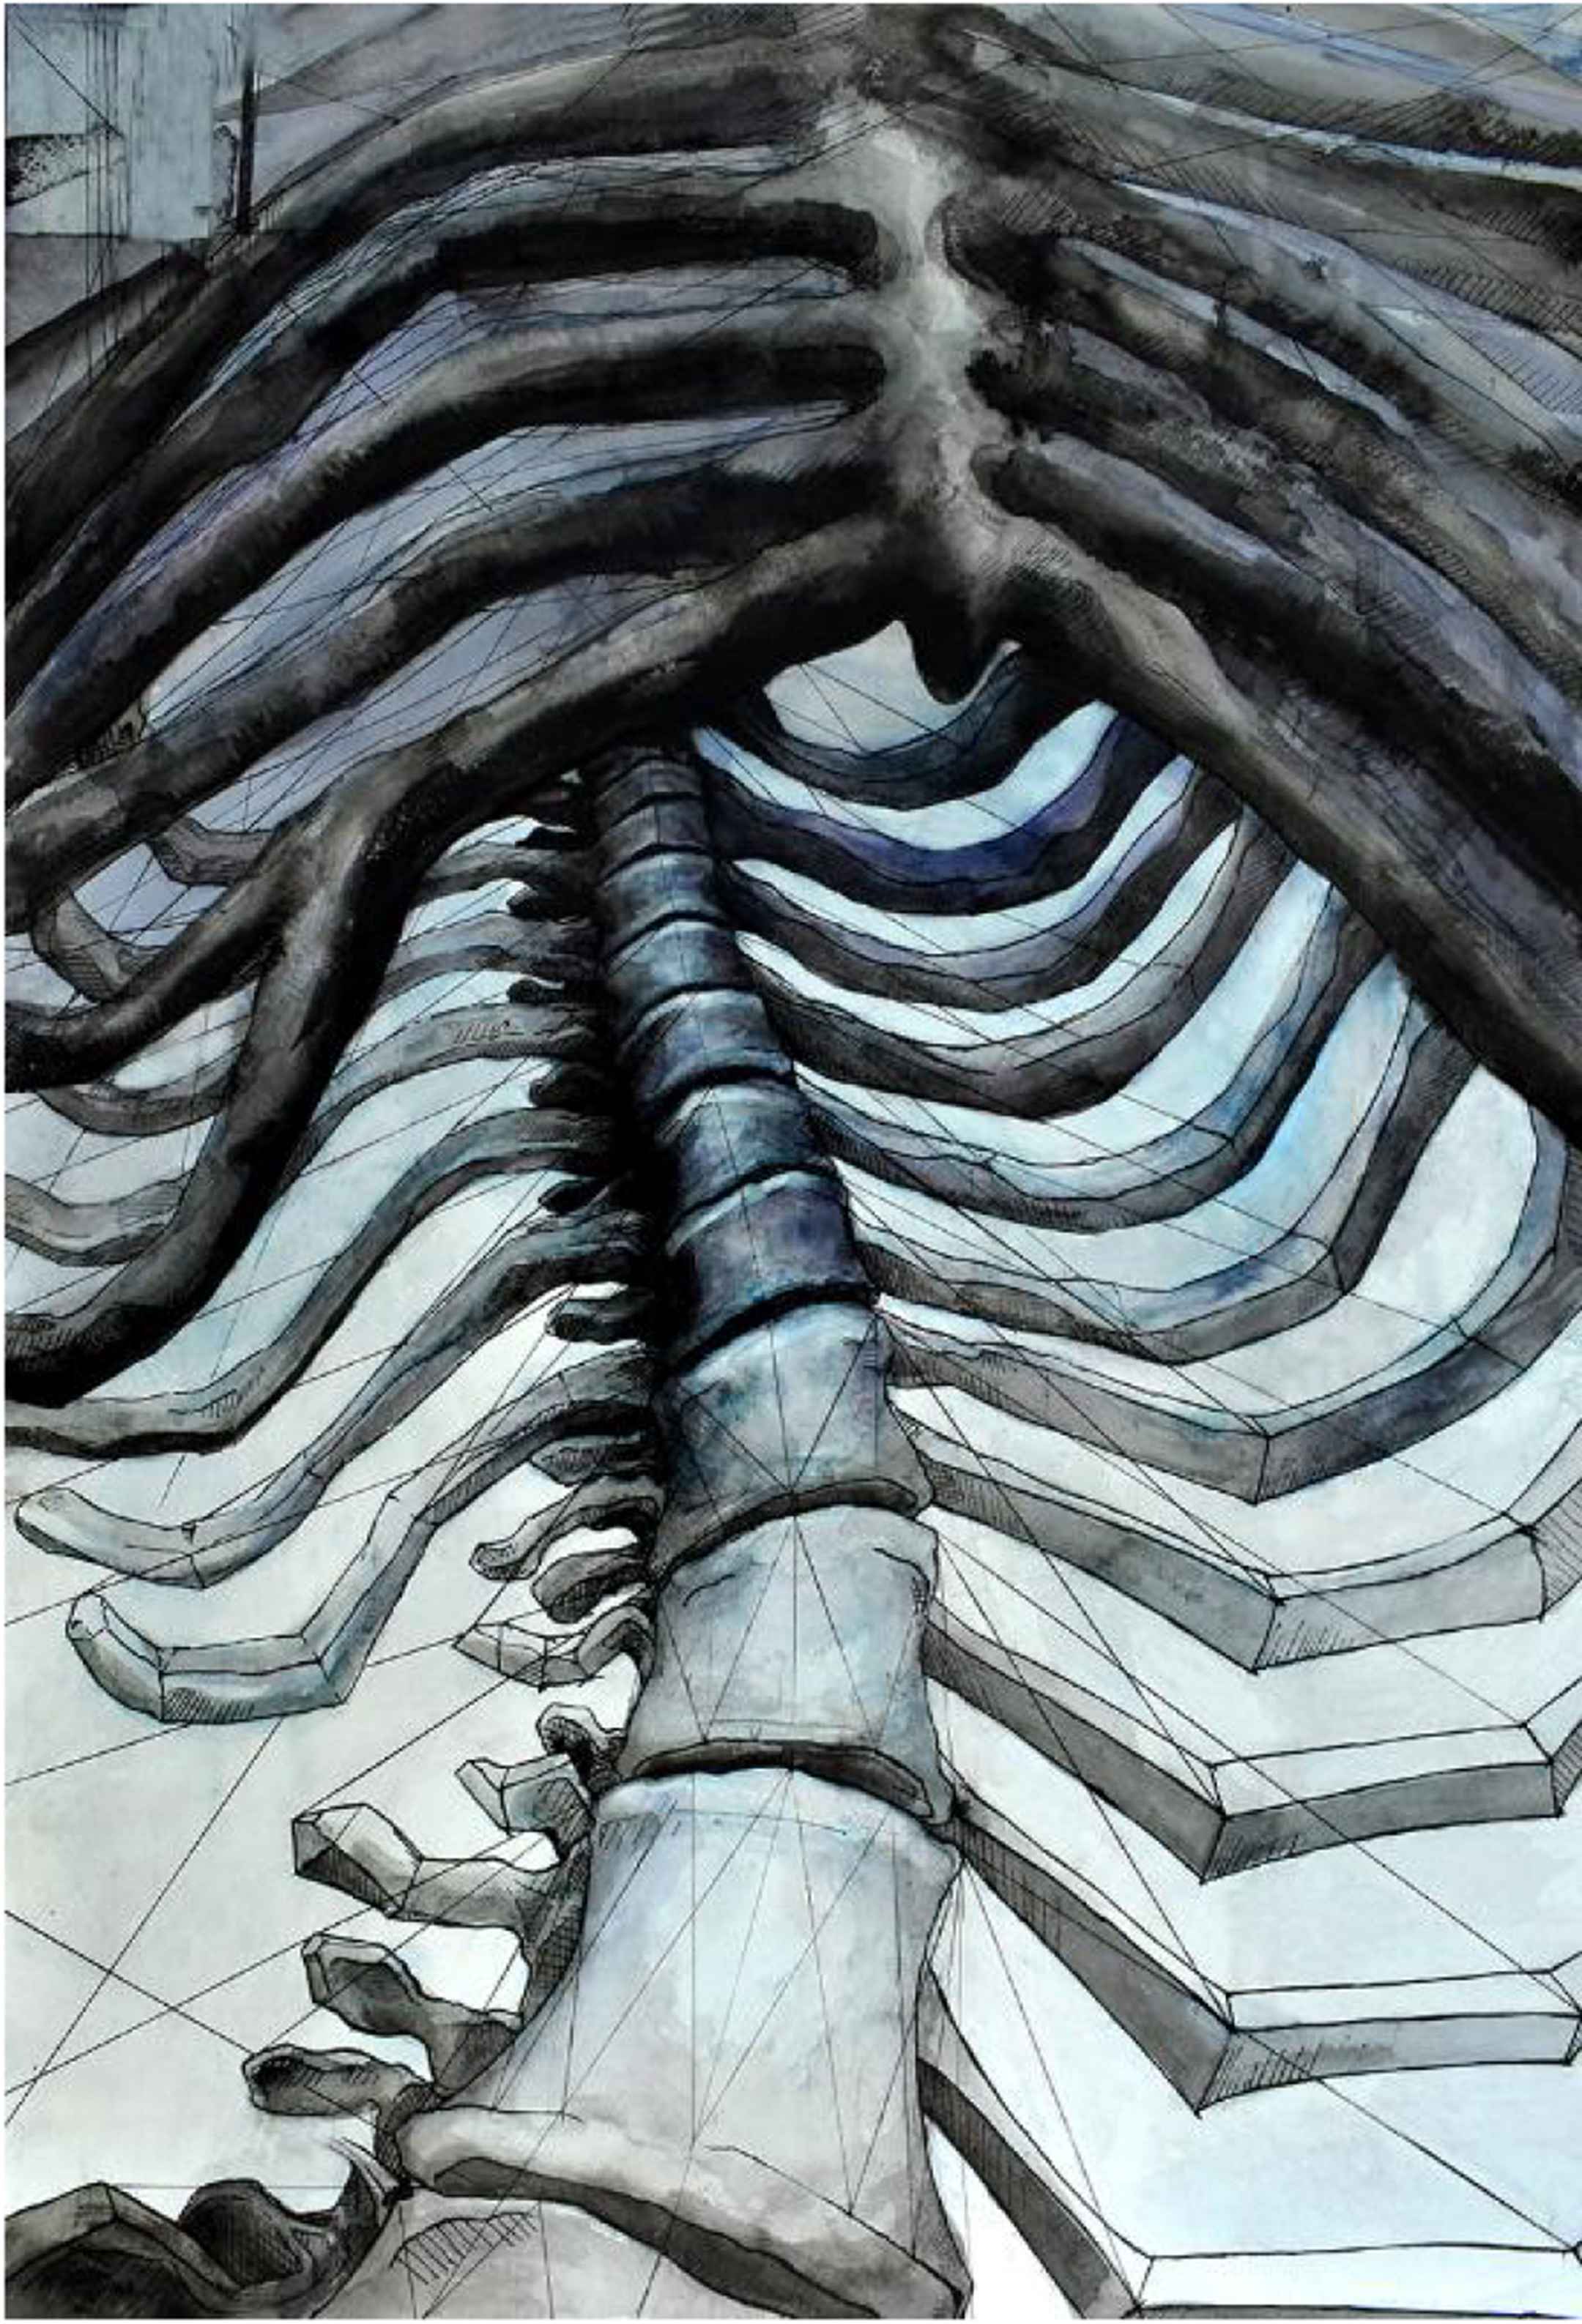 Black and white illustration of a rib cage and spine